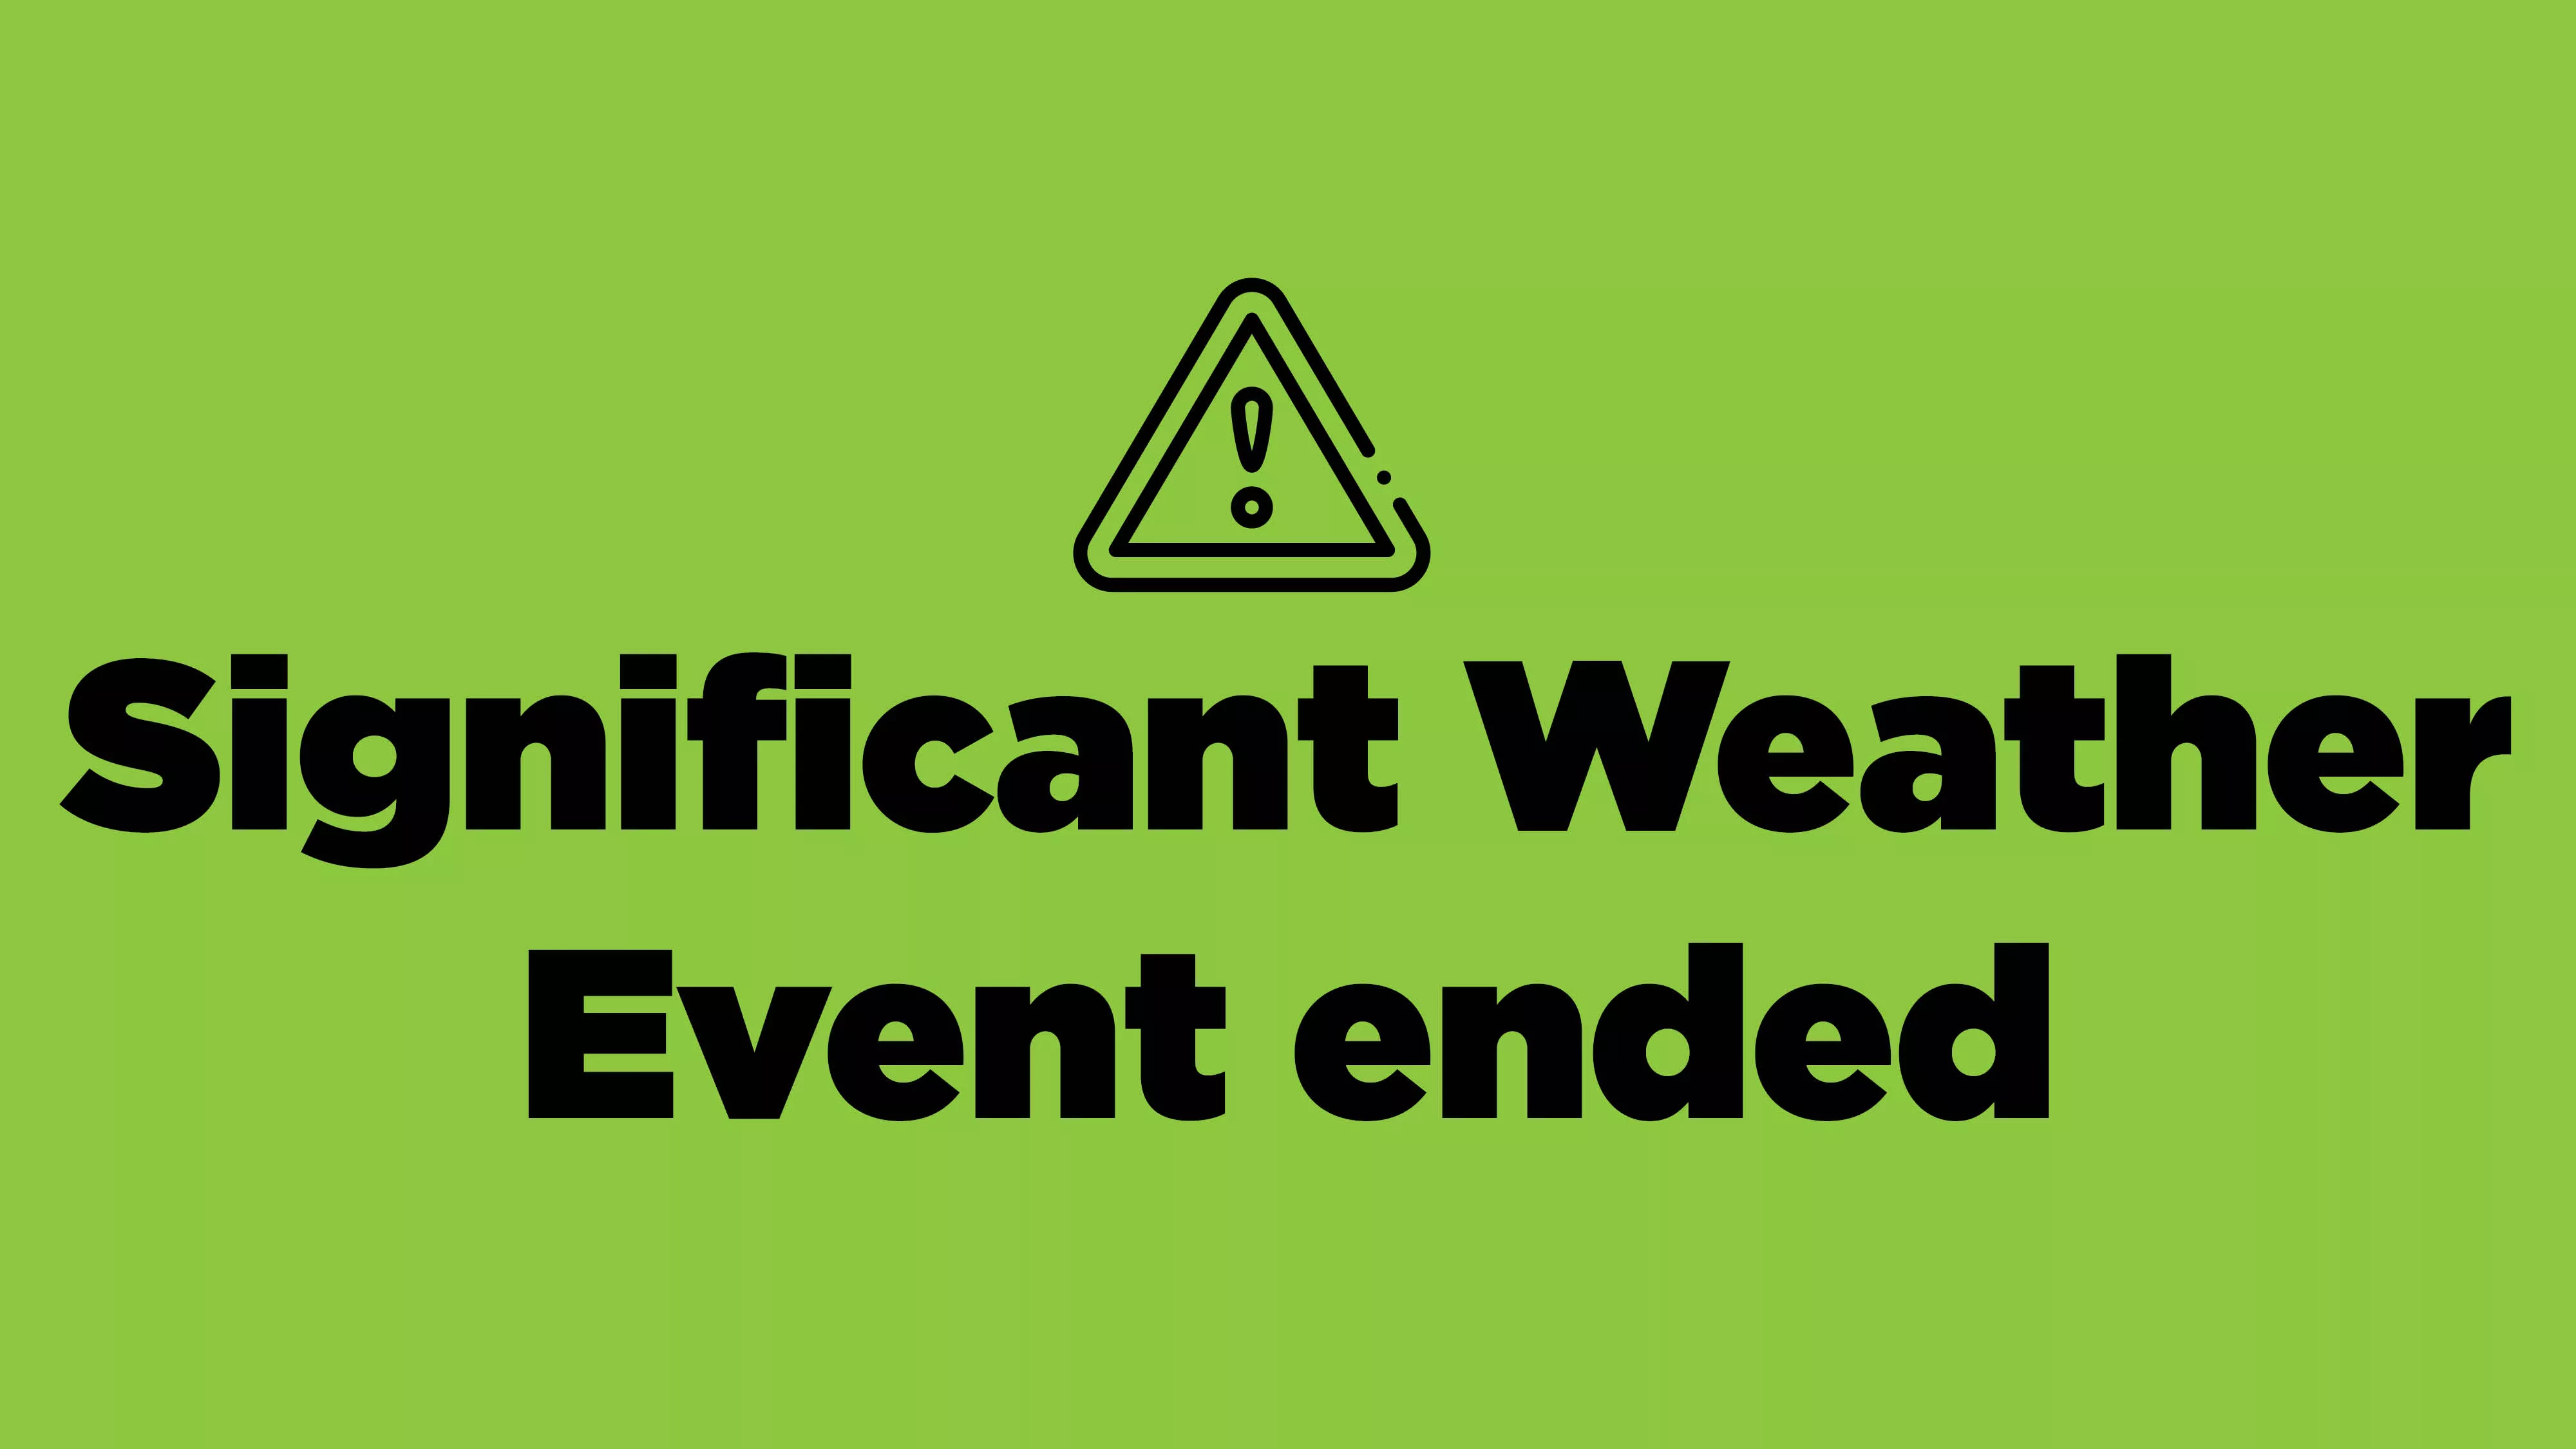 green graphic with "Significant Weather Event ended" on it